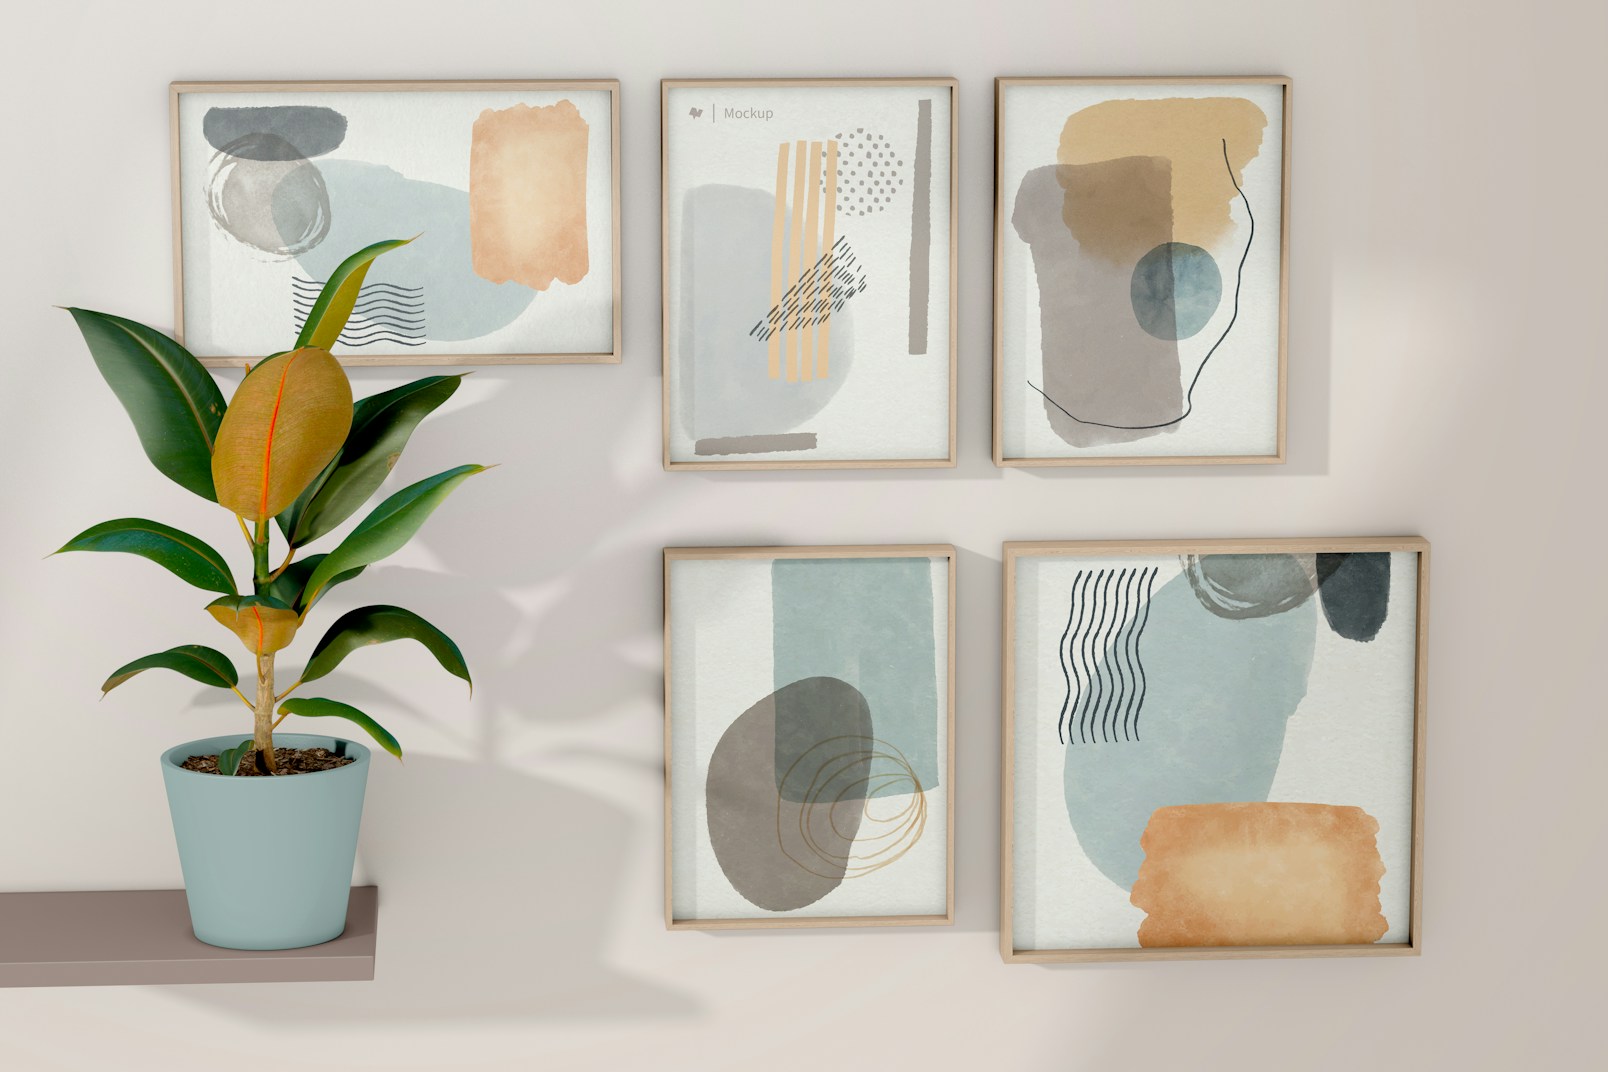 Gallery Frames with Plant Mockup, Front View